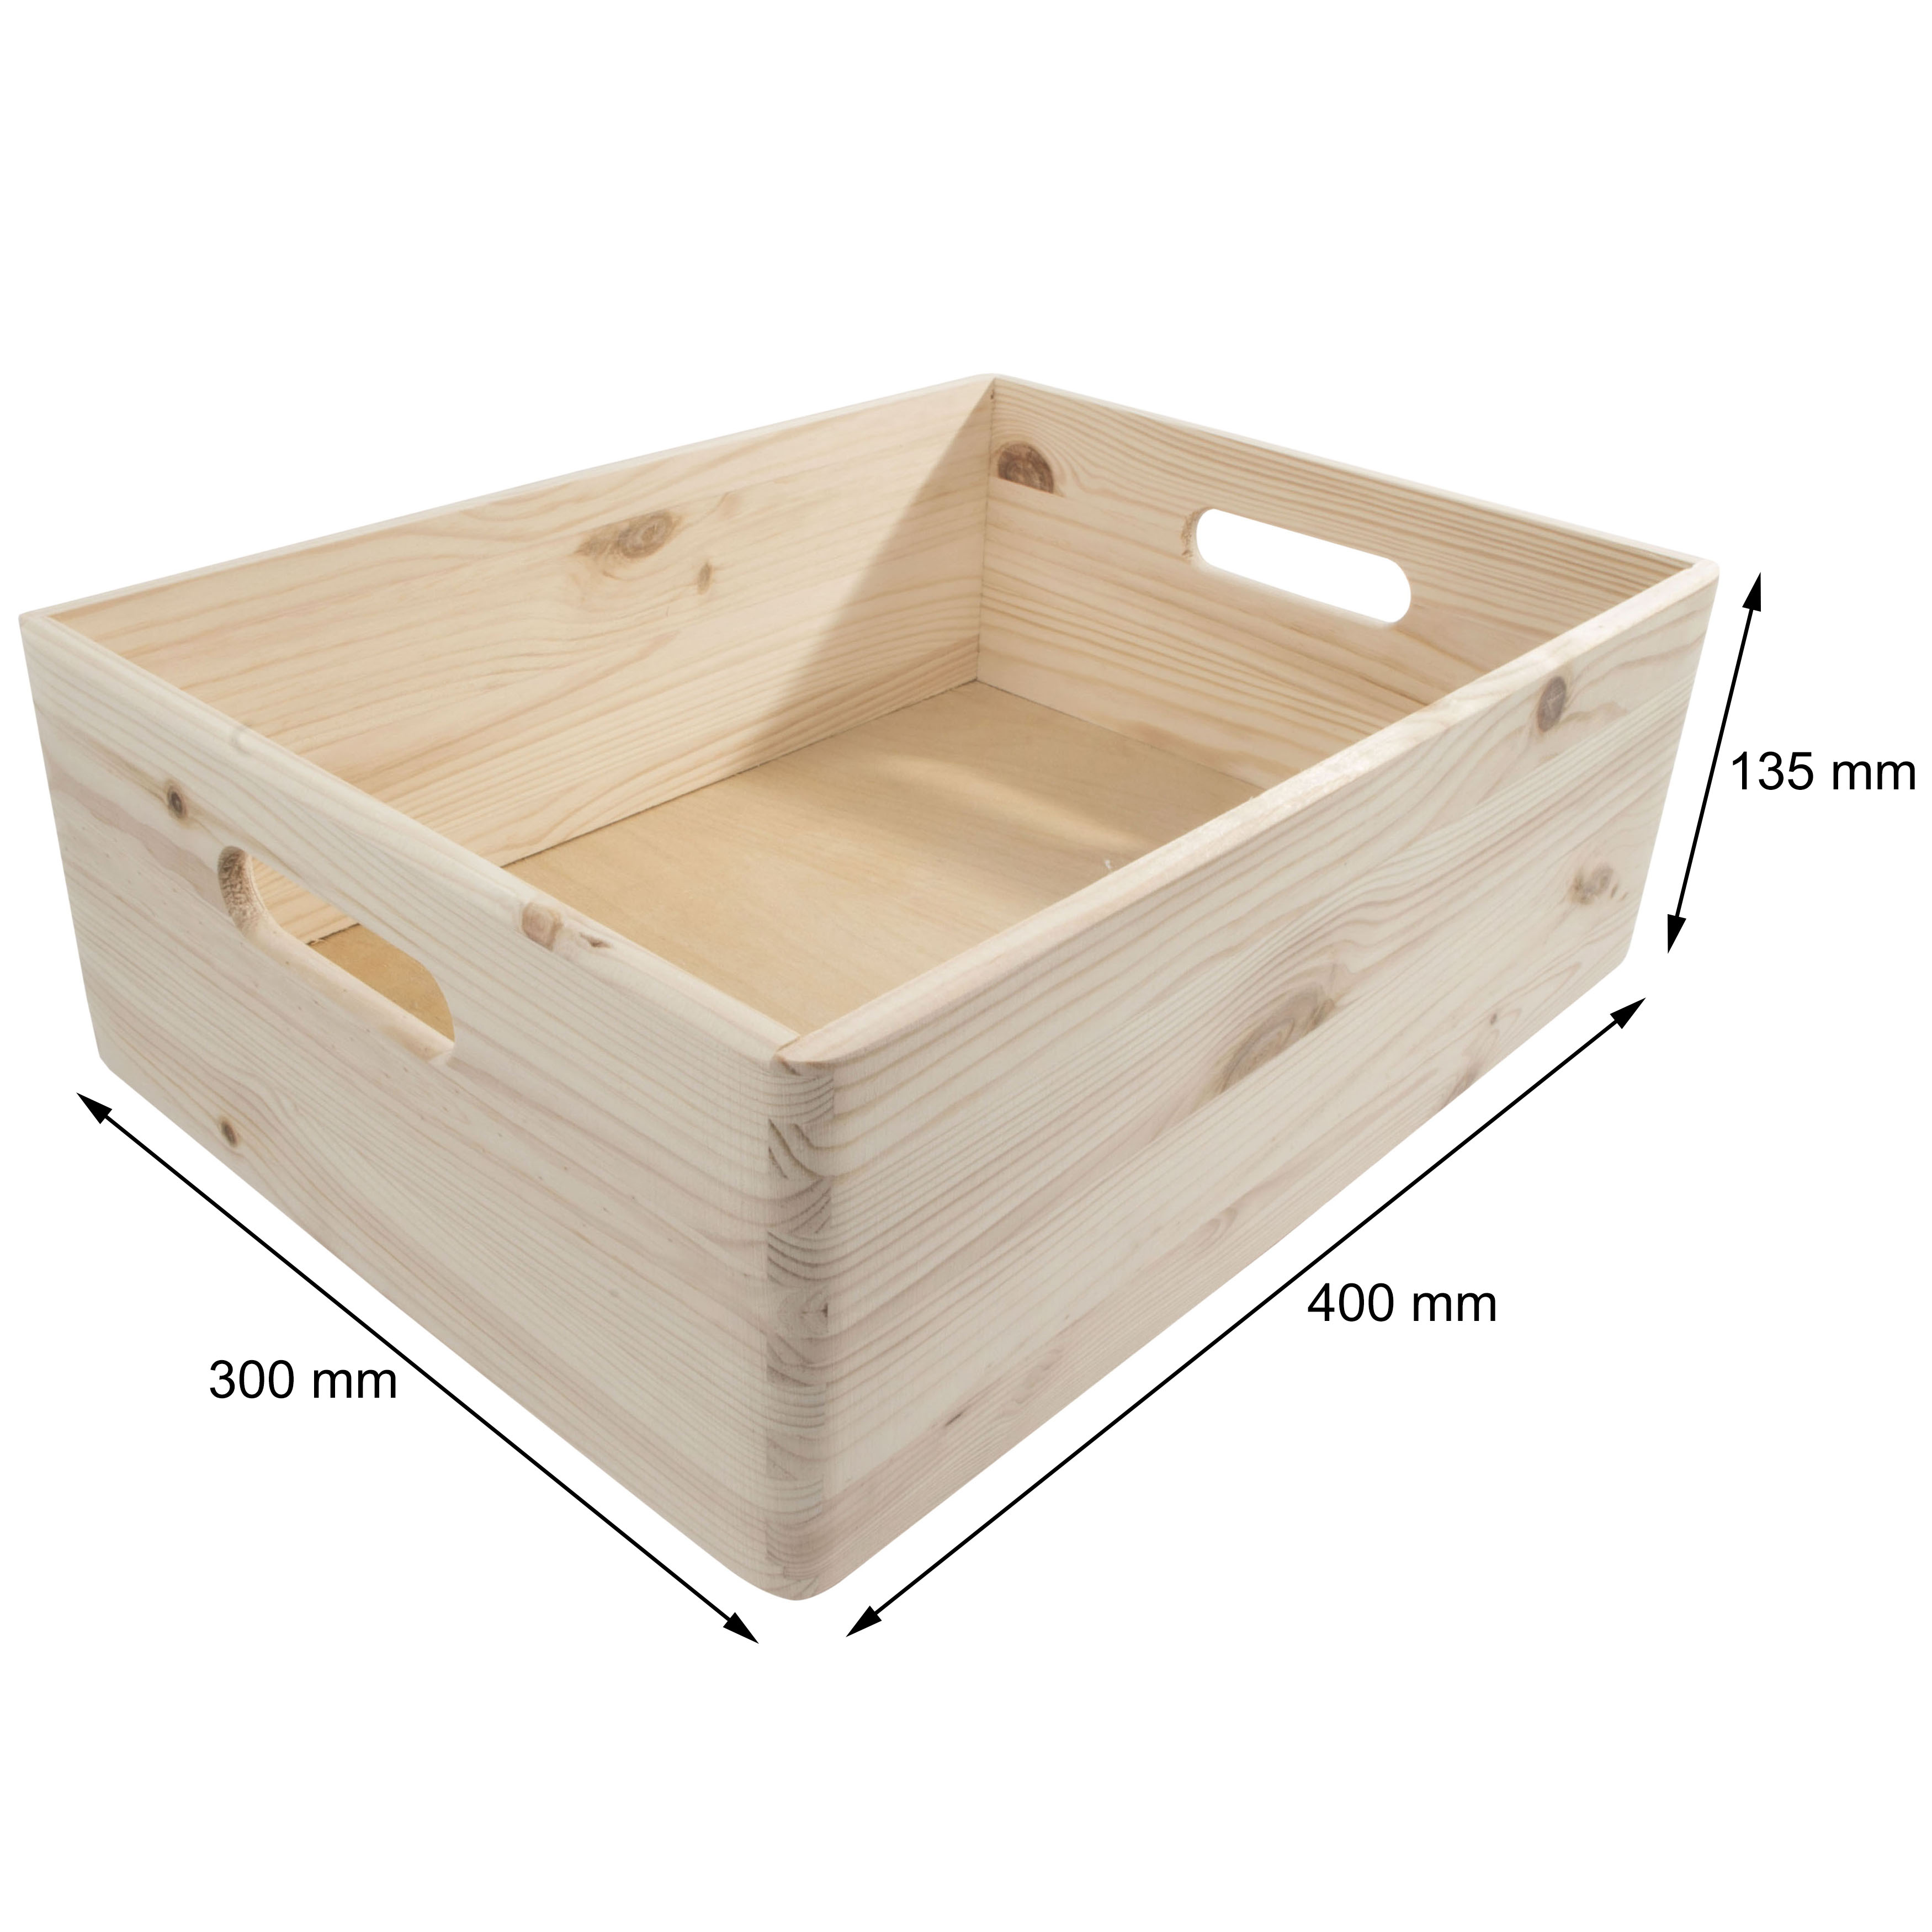 Trinket box Storage Box Box for toys,40x30x23cm Whit Handle in Multi Colors Large Wooden Box